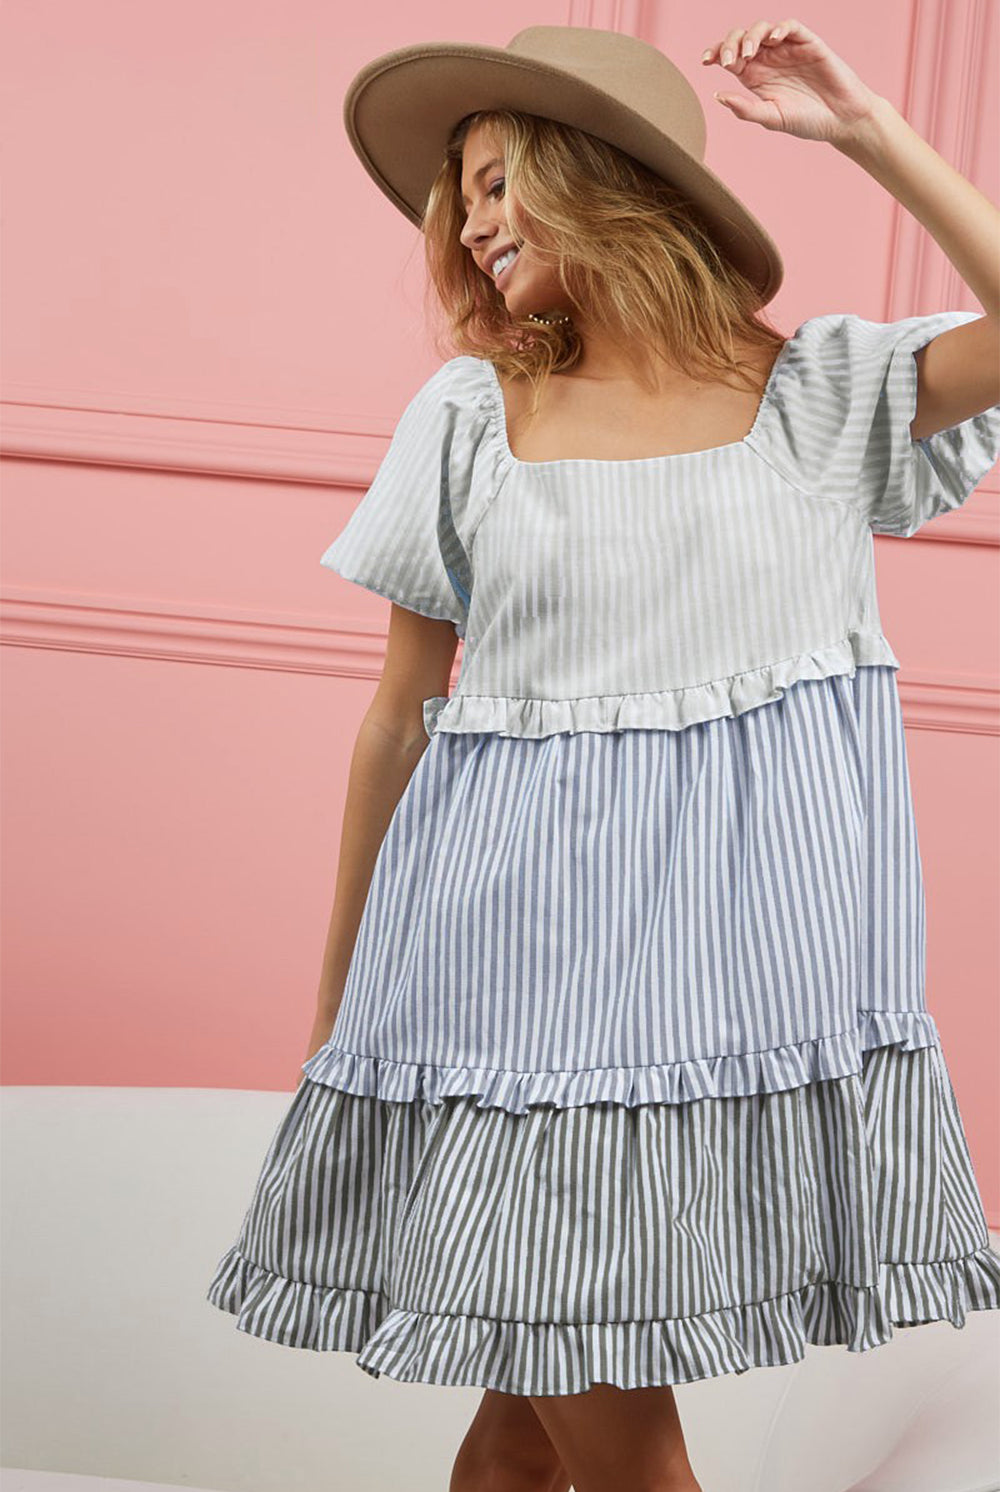 A joyful woman poses in a playful ruffled tiered mini dress with light blue and white vertical stripes, featuring flutter sleeves and a square neckline. She complements the dress with a wide-brimmed tan hat, creating a fresh and fashionable summer look against a pink background.